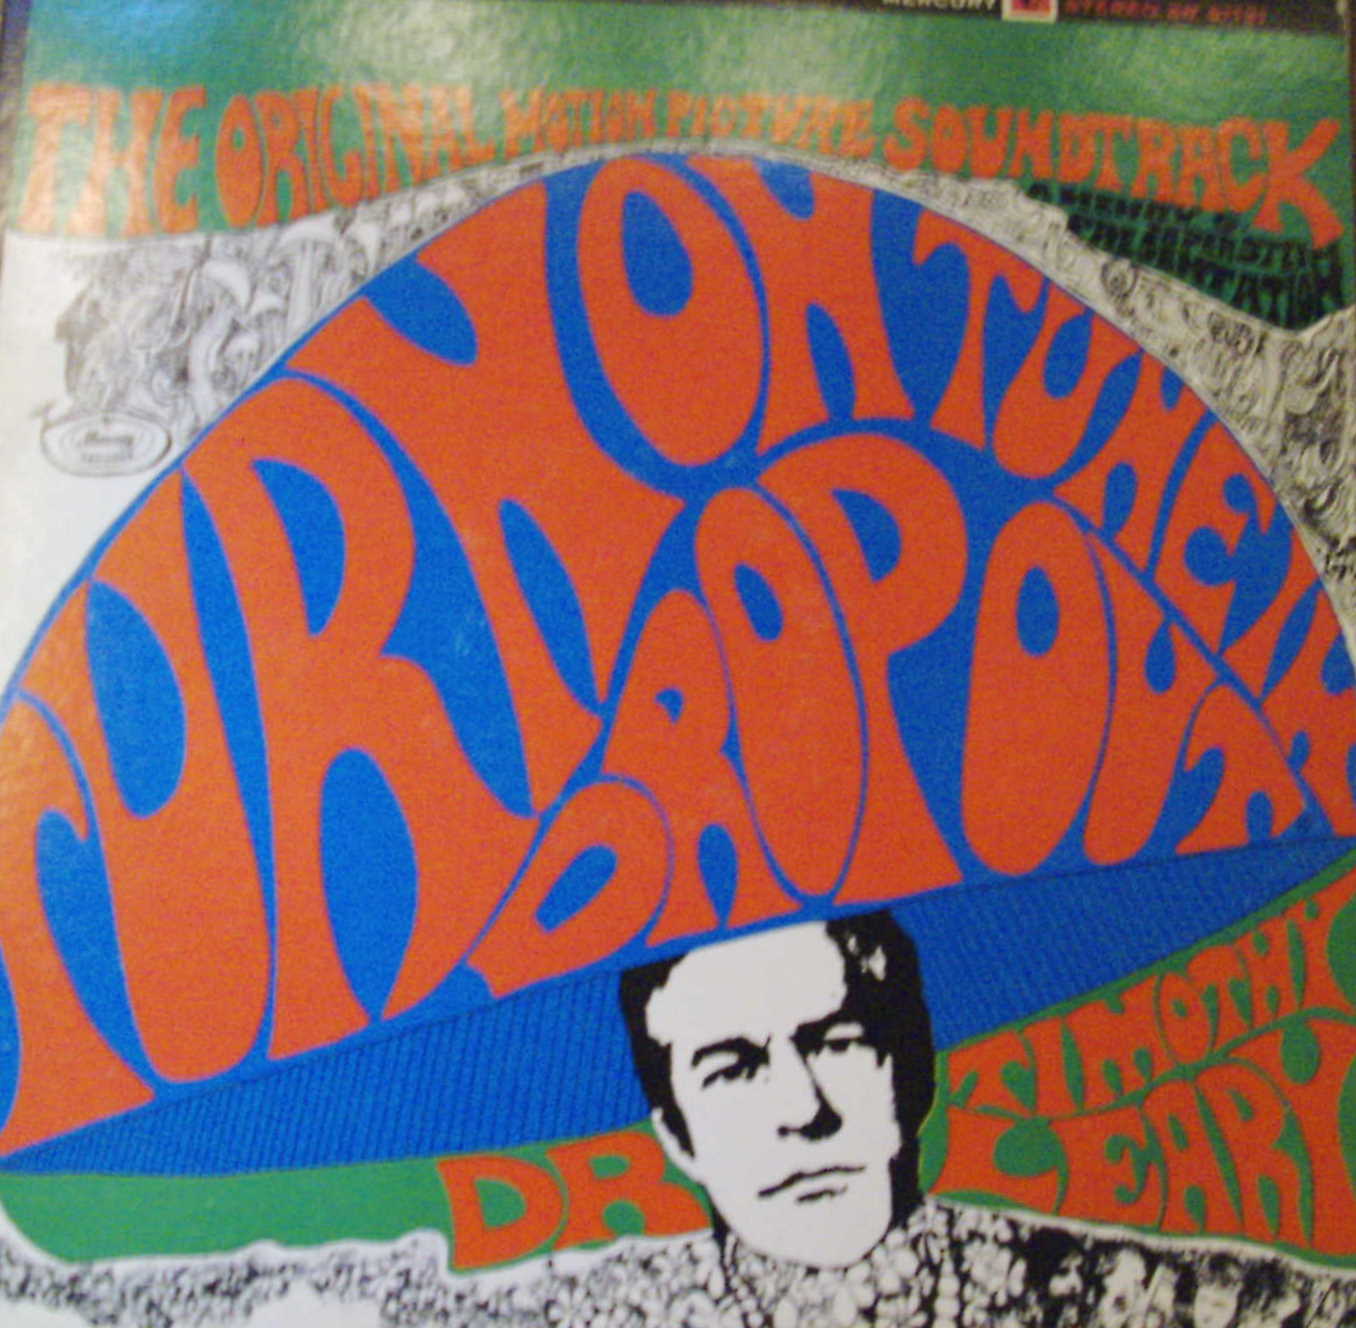 Dr. Timothy Leary / Turn On, Tune In & Drop Out